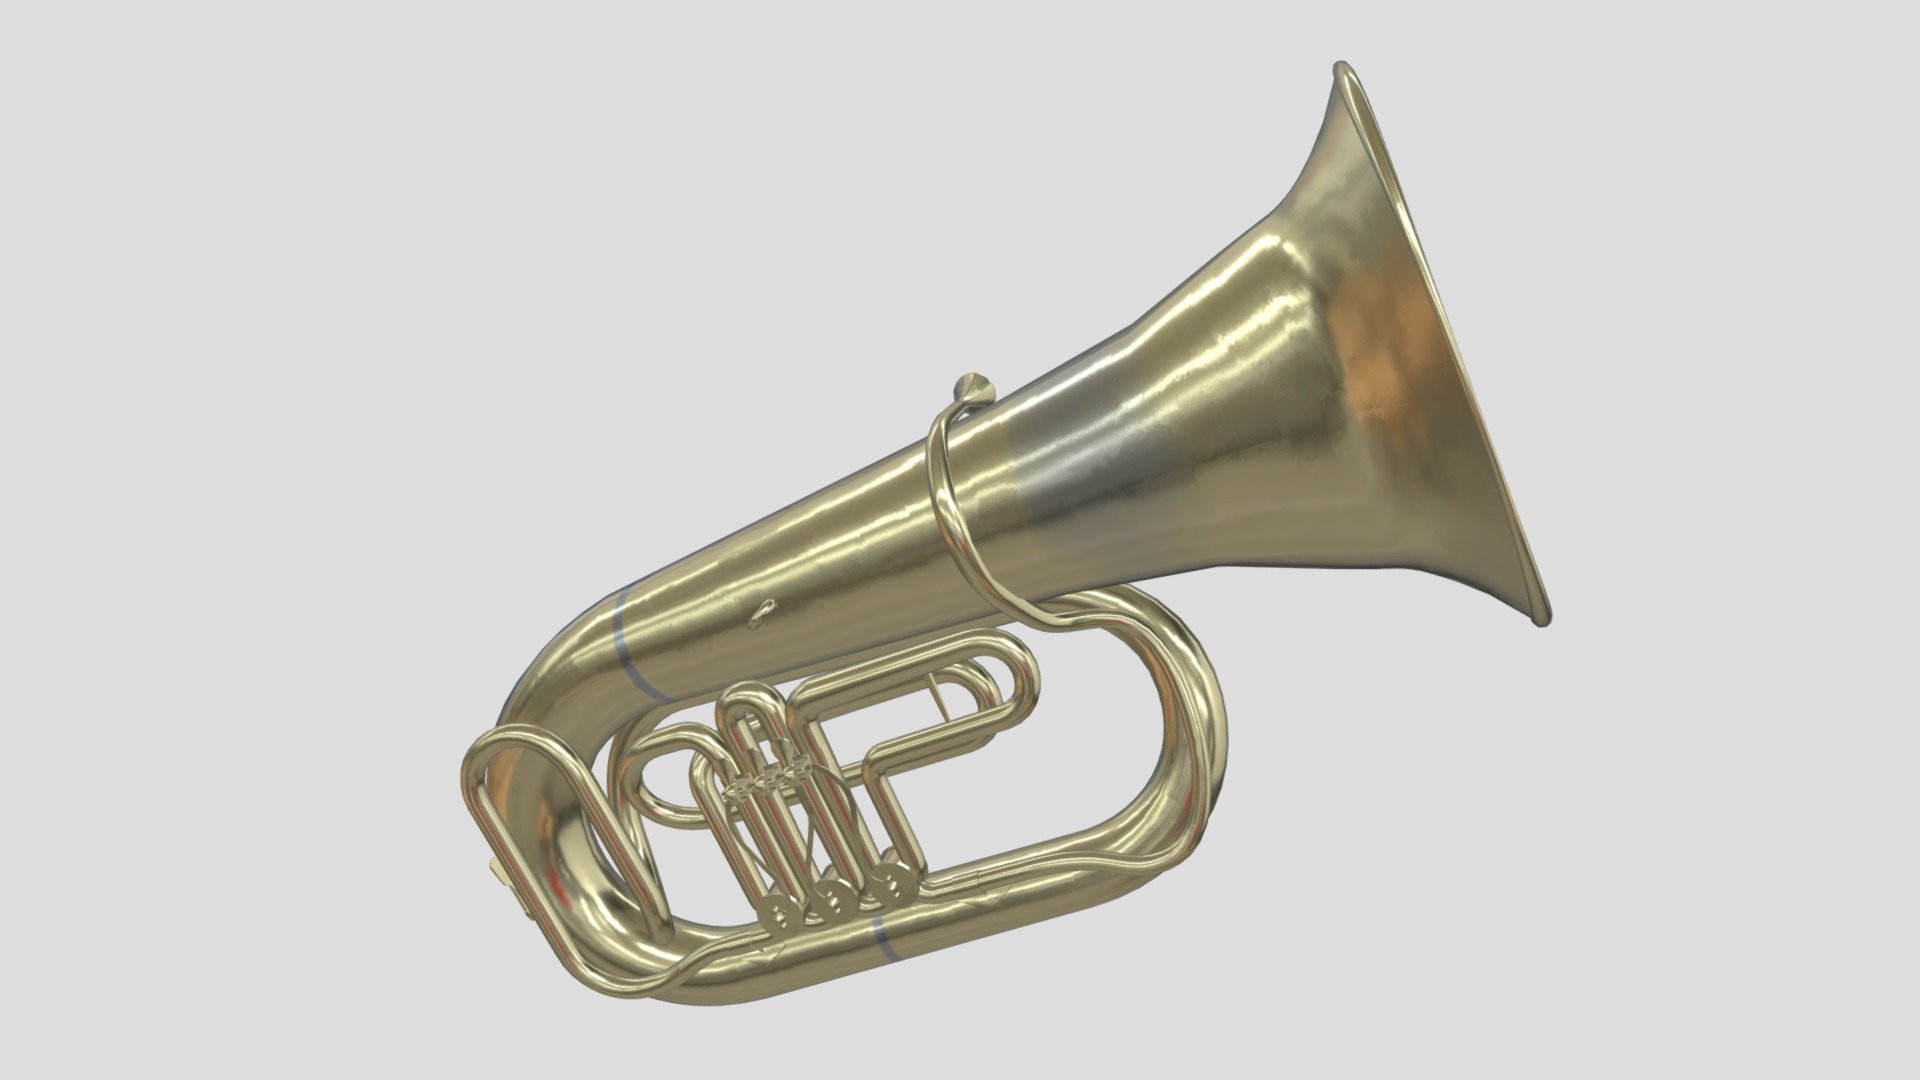 3d model of a Tuba. Perfect for games, scenes or renders.

Model is correctly divided into main parts. All main parts are presented as separate parts therefore materials of objects are easy to be modified or removed and standard parts are easy to be replaced.

TEXTURES: Models includes high textures with maps: Base Color (.png) Height (.png) Metallic (.png) Normal (.png) Roughness (.png)

FORMATS: .obj .dae .stl .blend .fbx .3ds

GENERAL: Easy editable. Model is fully textured.

Vertices: 14.5 k Polygons: 11.5 k

All formats have been tested and work correctly.

Some files may need textures or materials adjusted or added depending on the program they are imported into 3d model